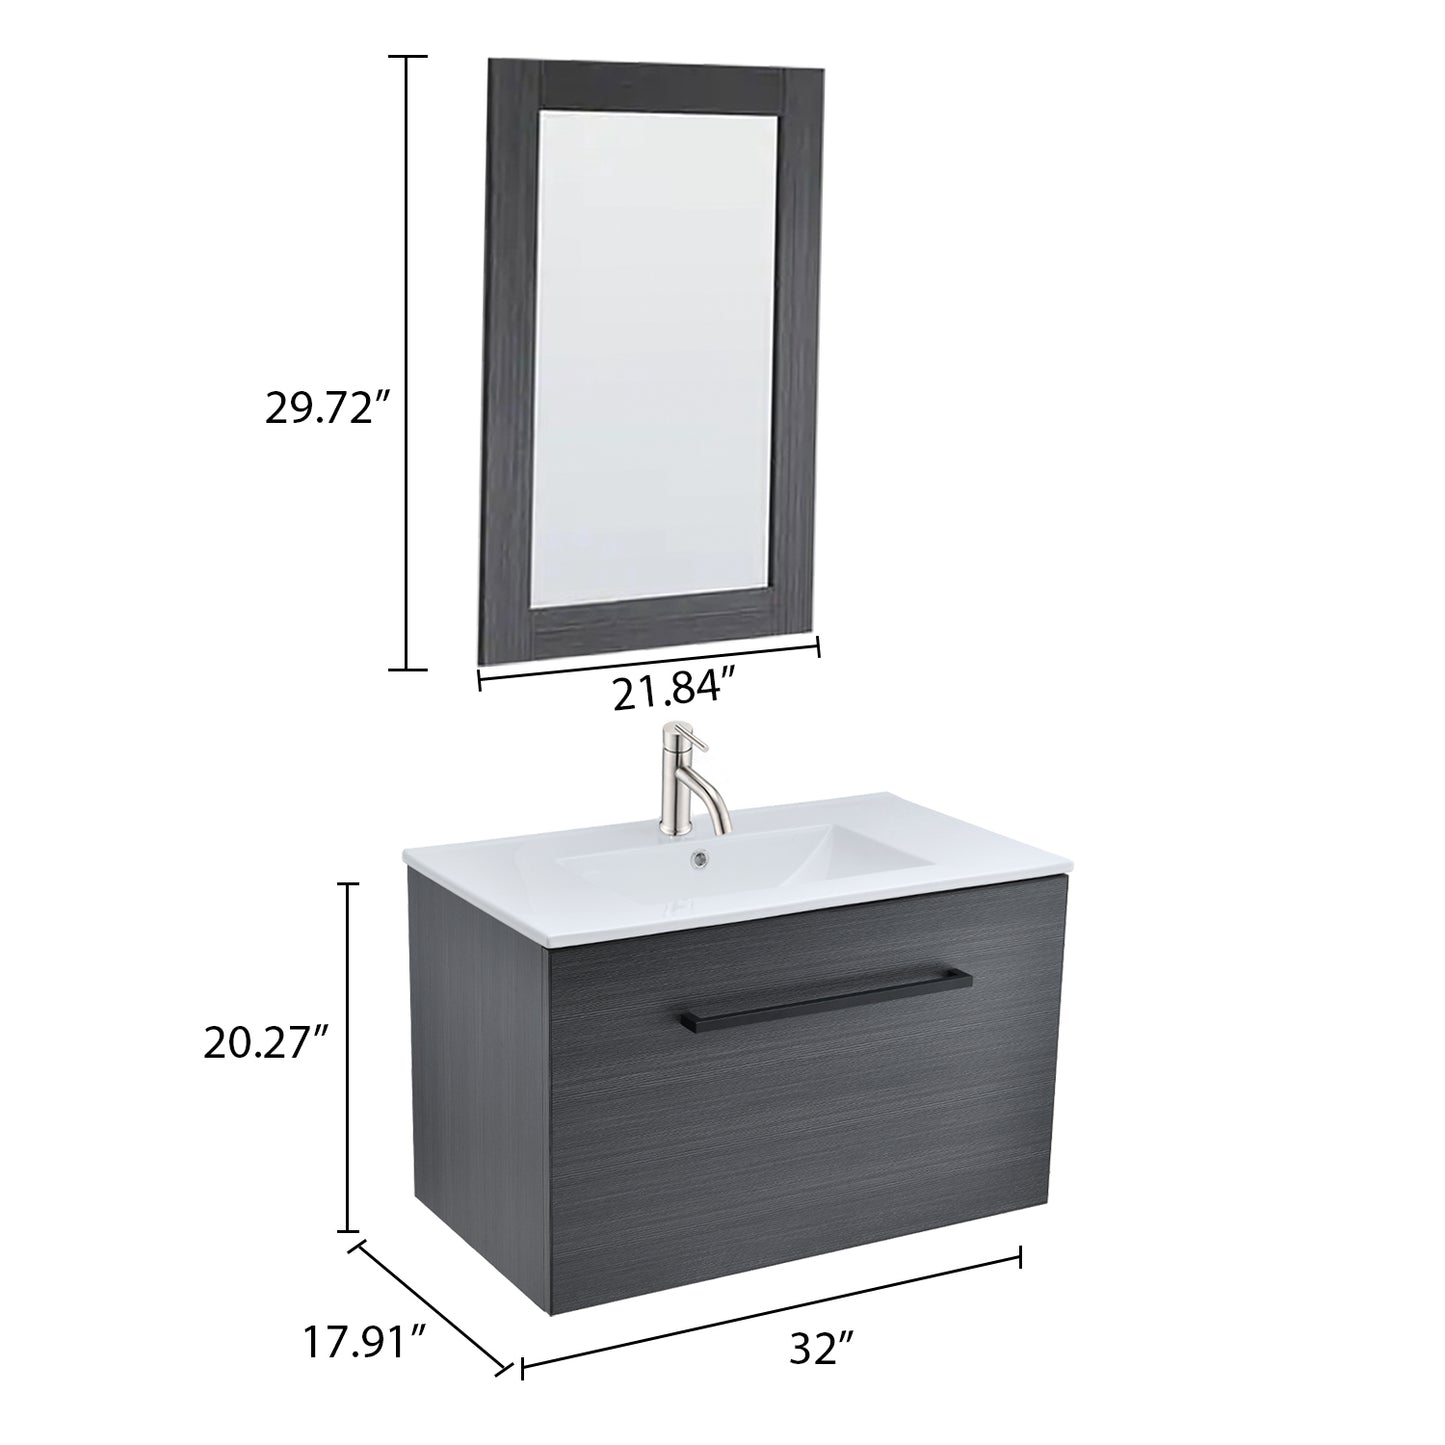 Wall-Mounted Cabinet, 32-inch Wide, Black Bathroom Vanity Cabinet Set with Mirror